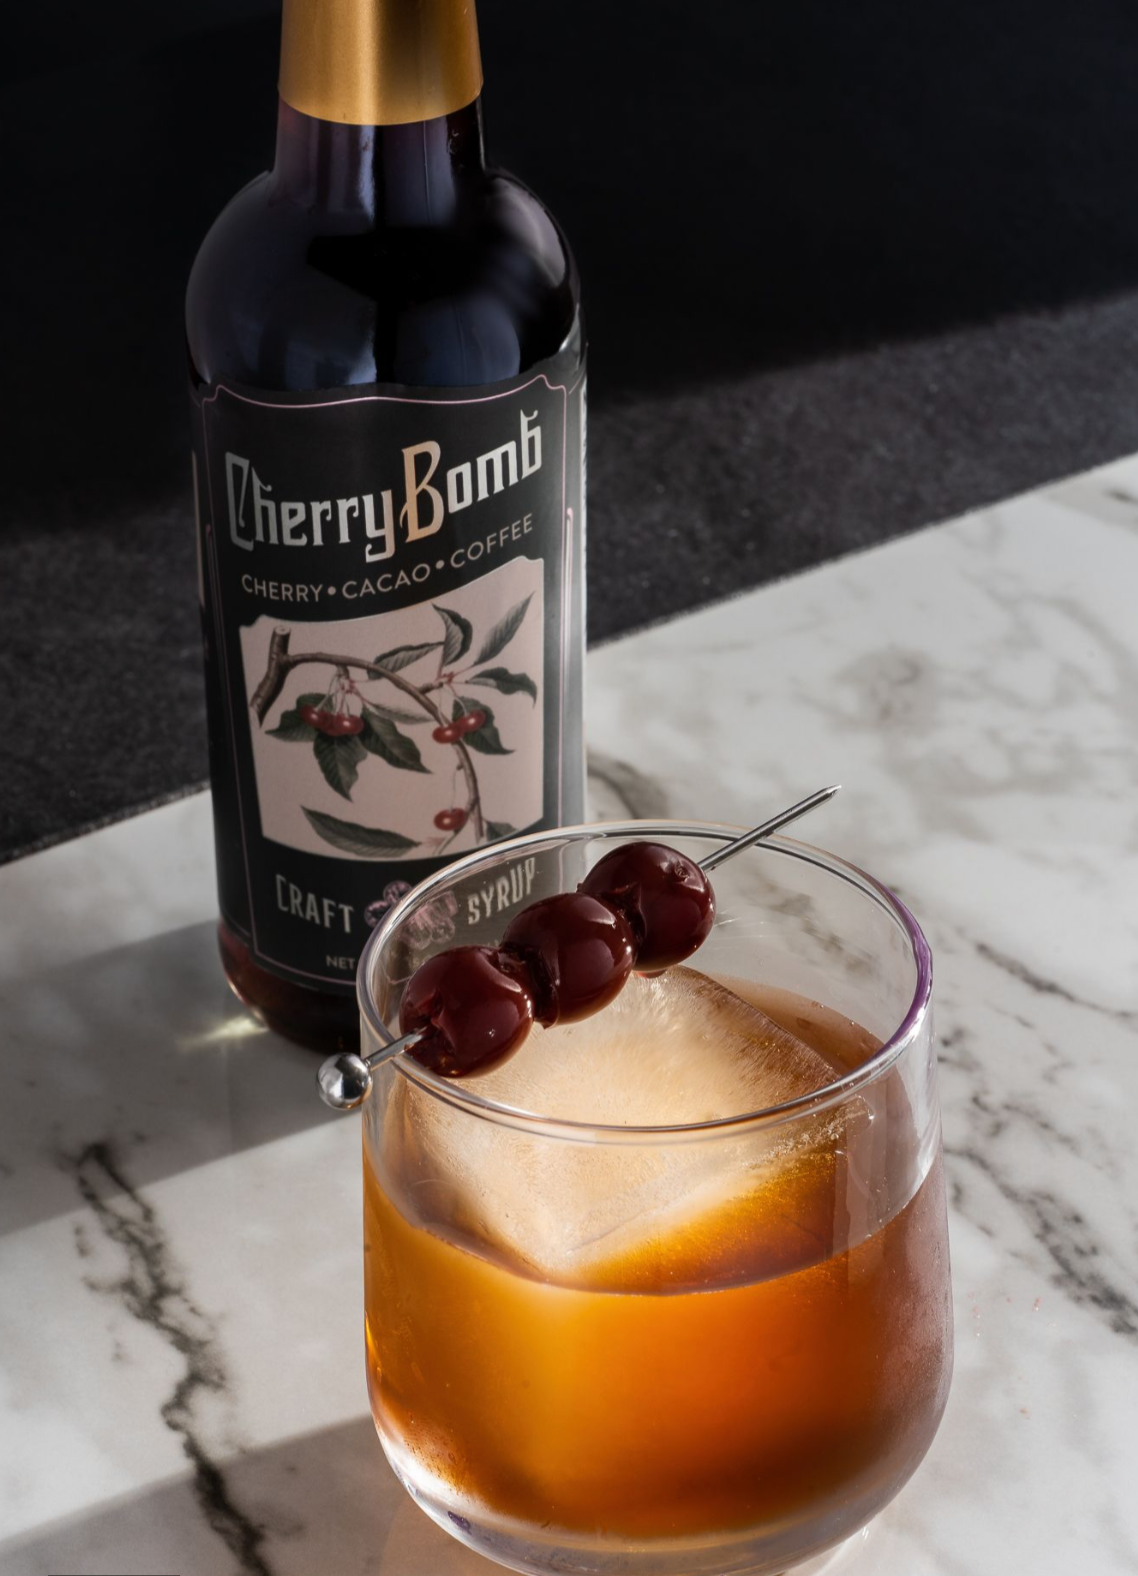 Cherry Bomb Syrup - Cherry, Coffee, & Cacao